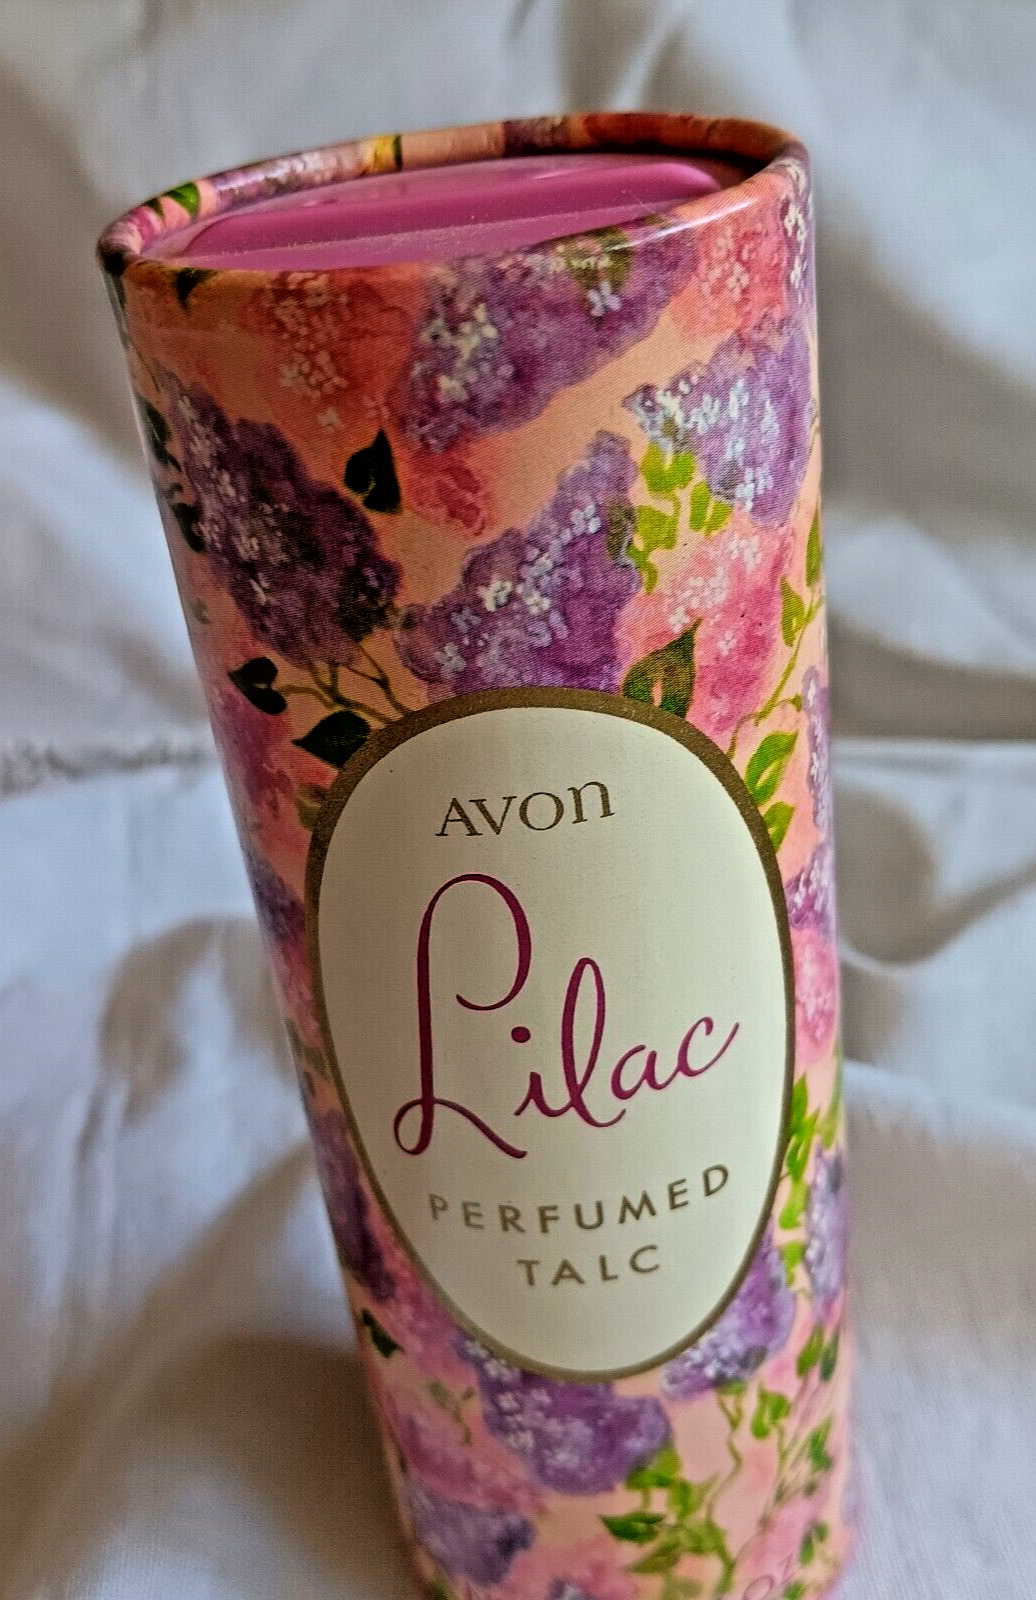 AVON Lilac Perfumed Talc, Vintage, 3.5oz, OPEN BUT 9O% FULL DISCONTINUED